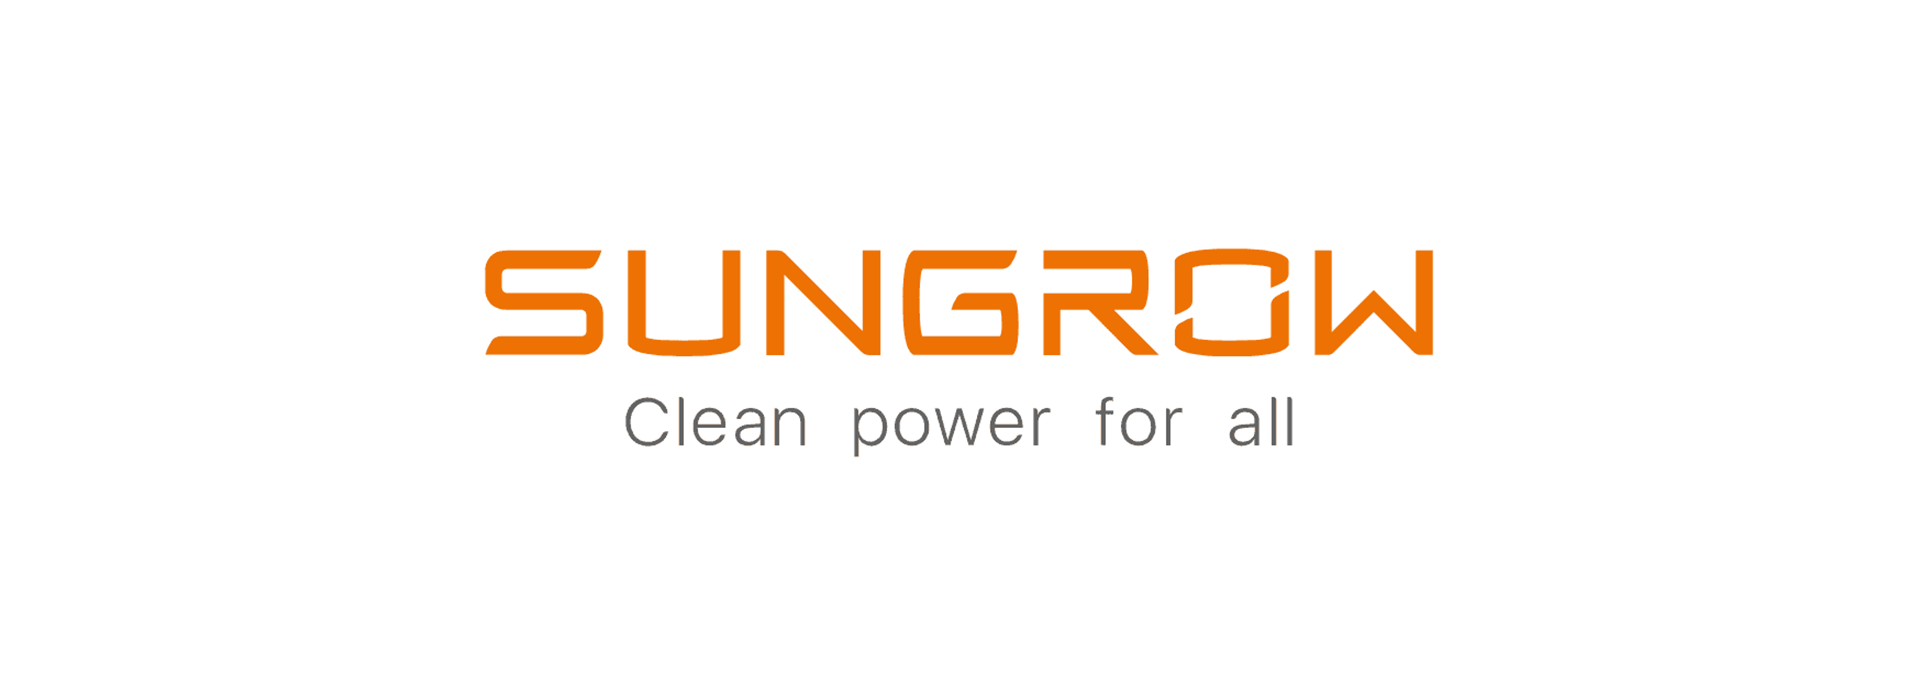 The sungrow logo is orange and white and says clean power for all